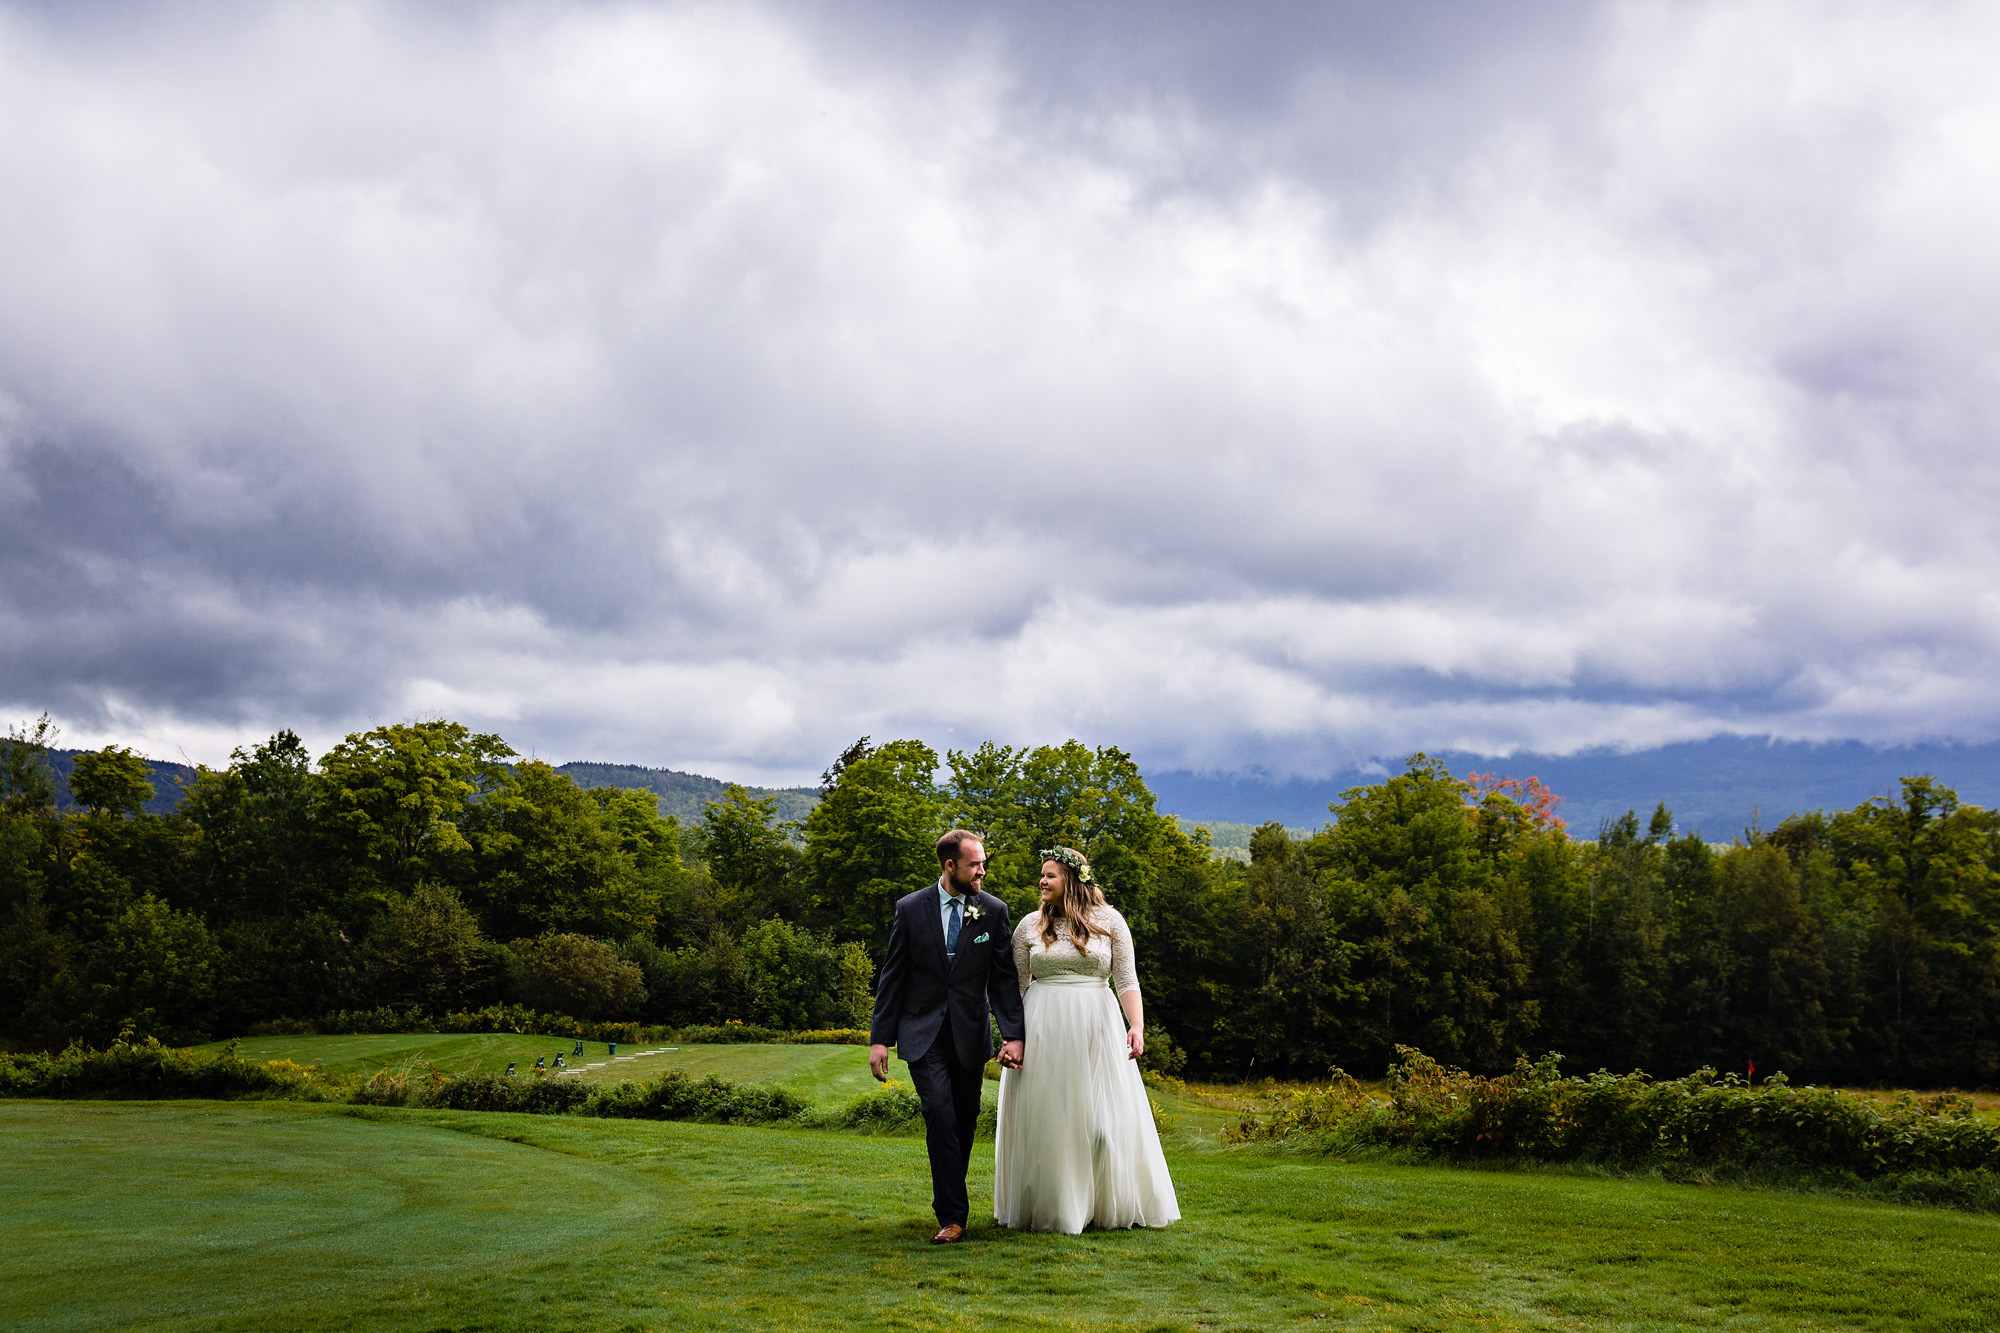 Wedding portraits at Sugarloaf Mountain in western Maine